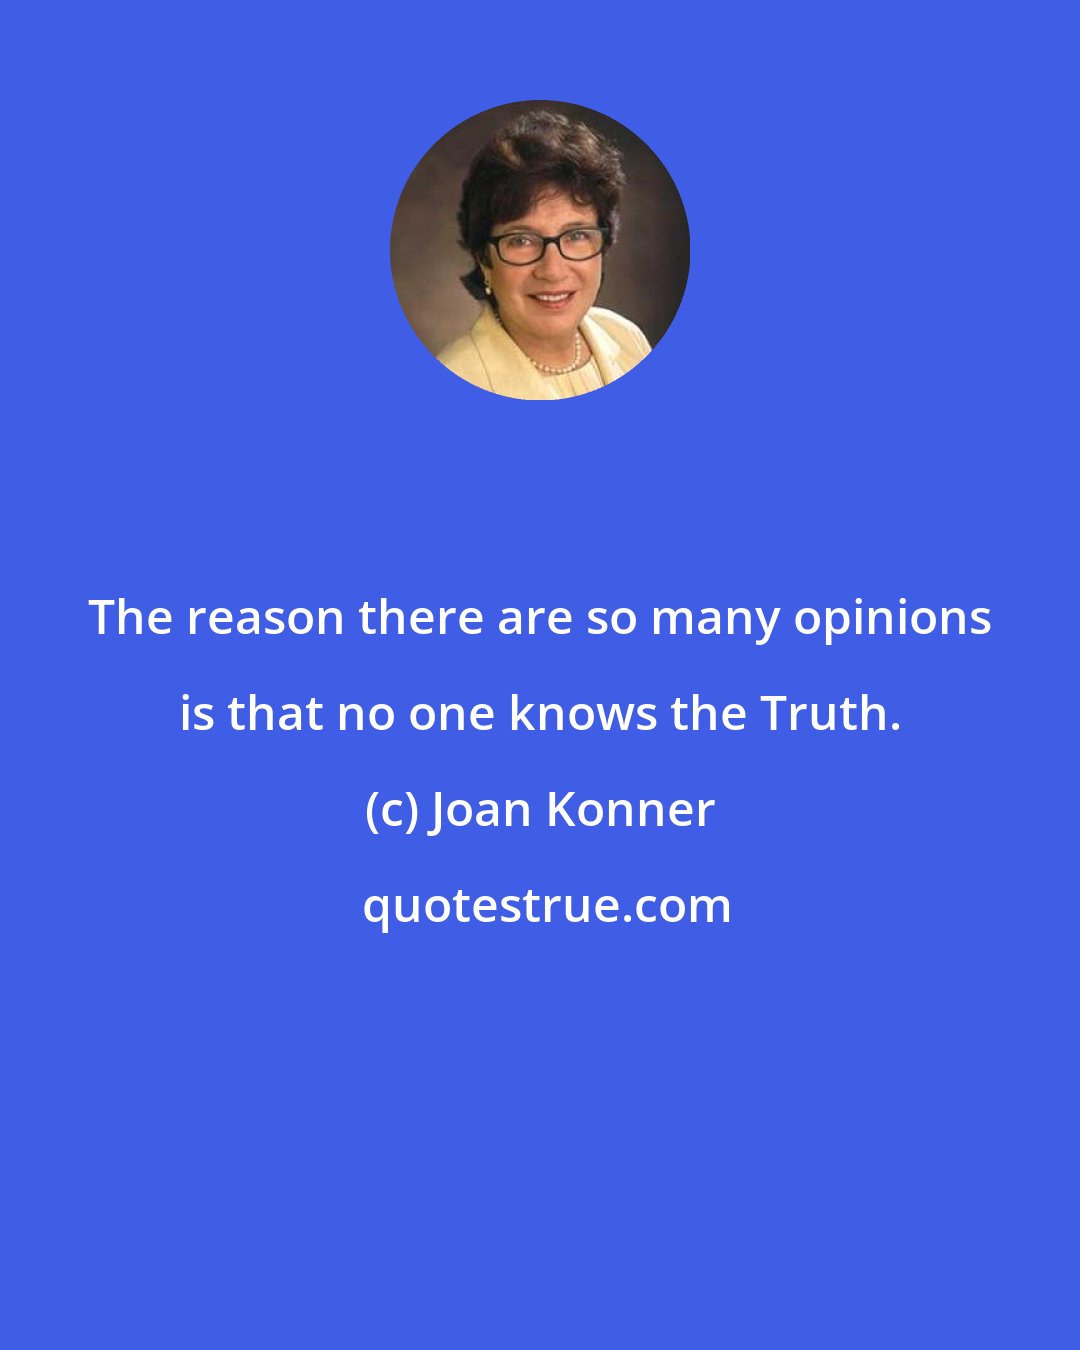 Joan Konner: The reason there are so many opinions is that no one knows the Truth.